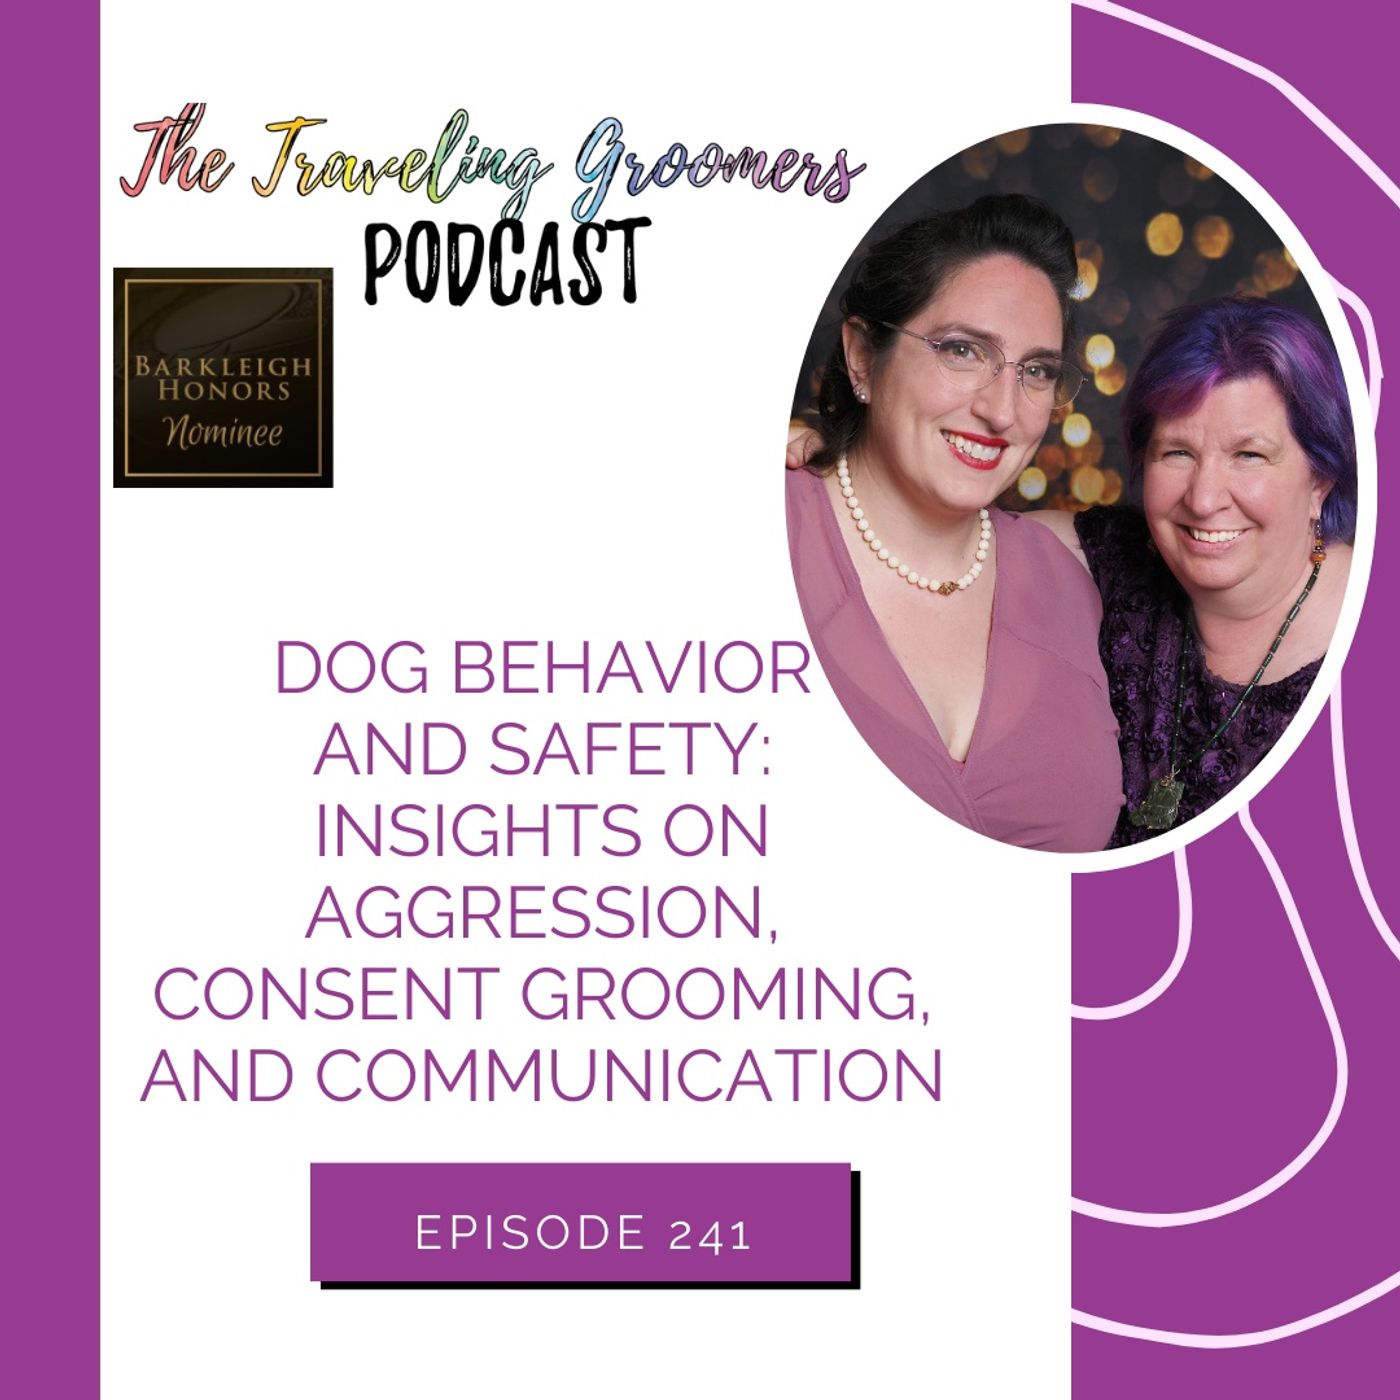 Dog Behavior and Safety Insights on Aggression, Consent Grooming, and Communication